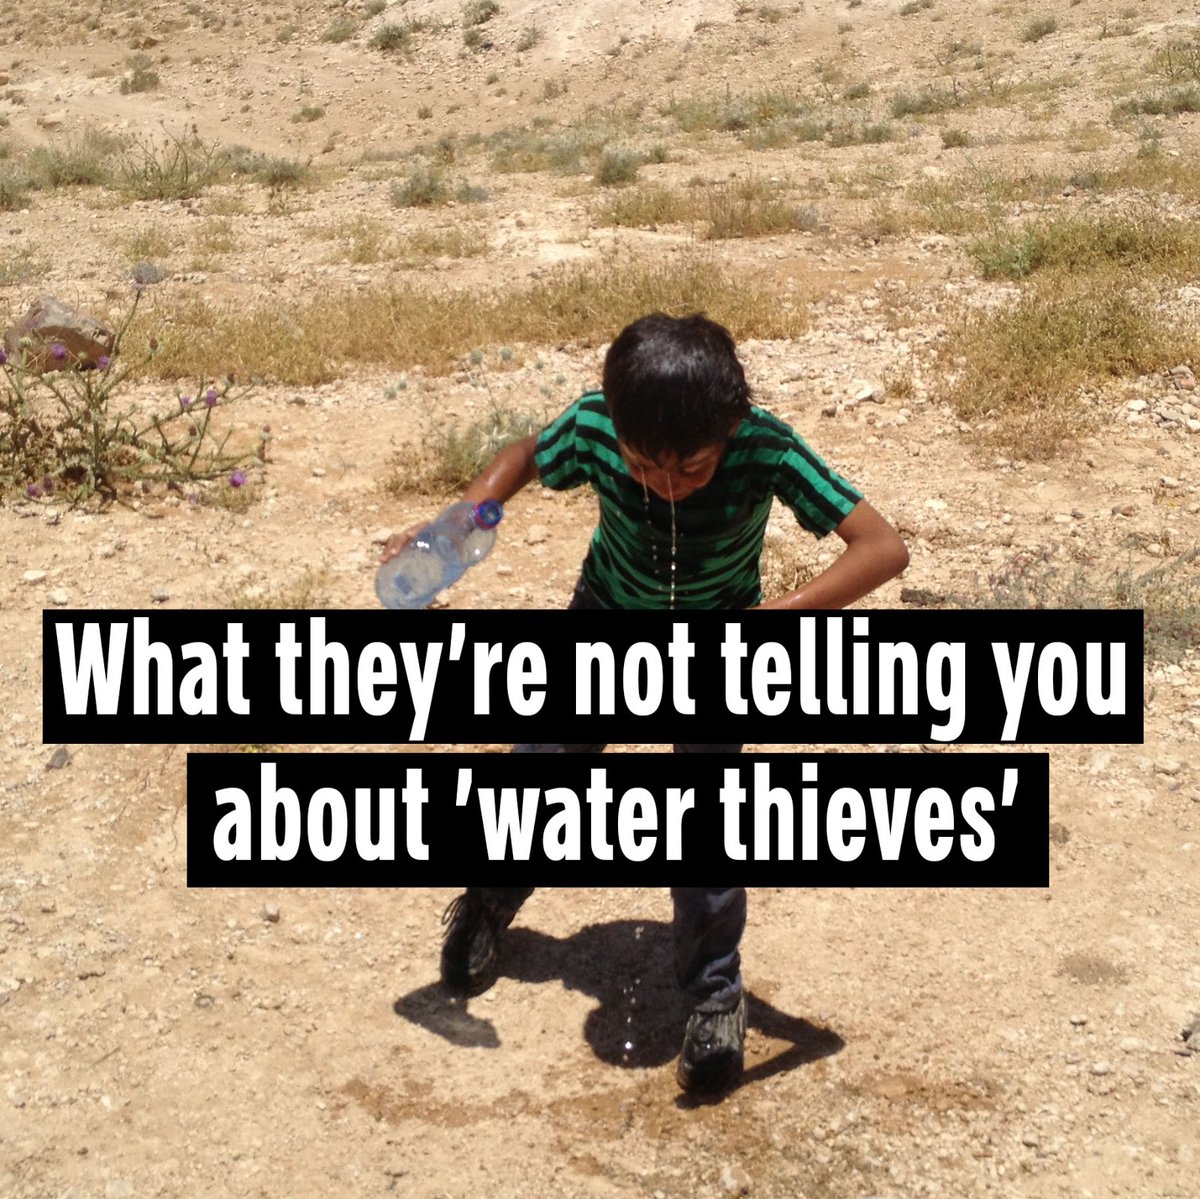 not_water-thieves